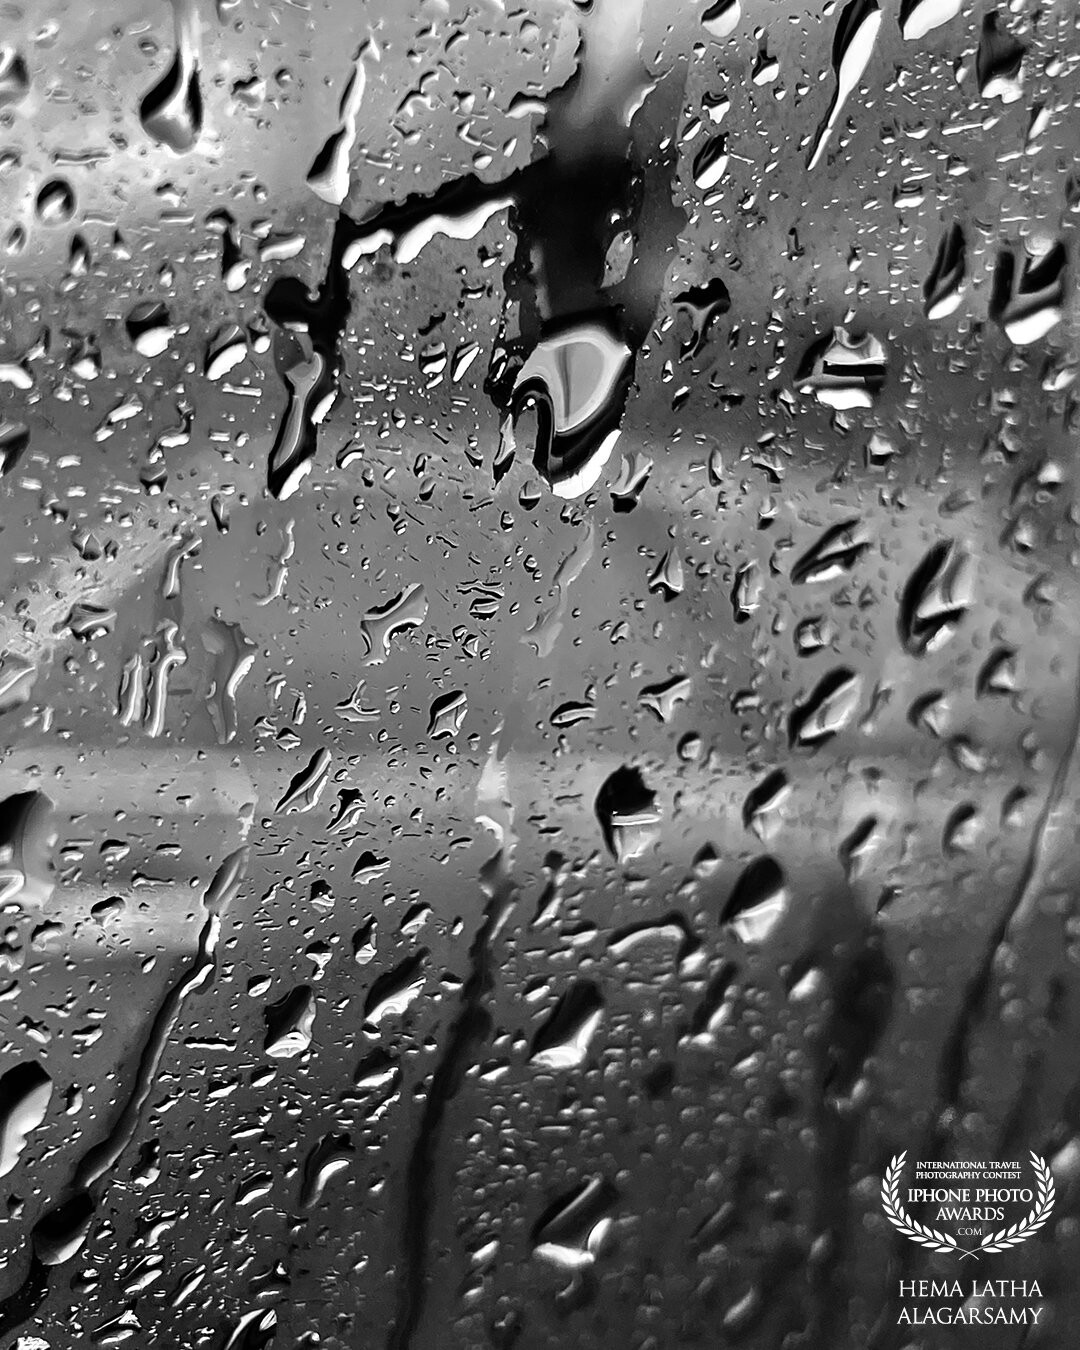 When I was young, I used to watch drops of rain roll down the window and pretend it was a race… and I think some things never change because I still find myself watching and pretending…